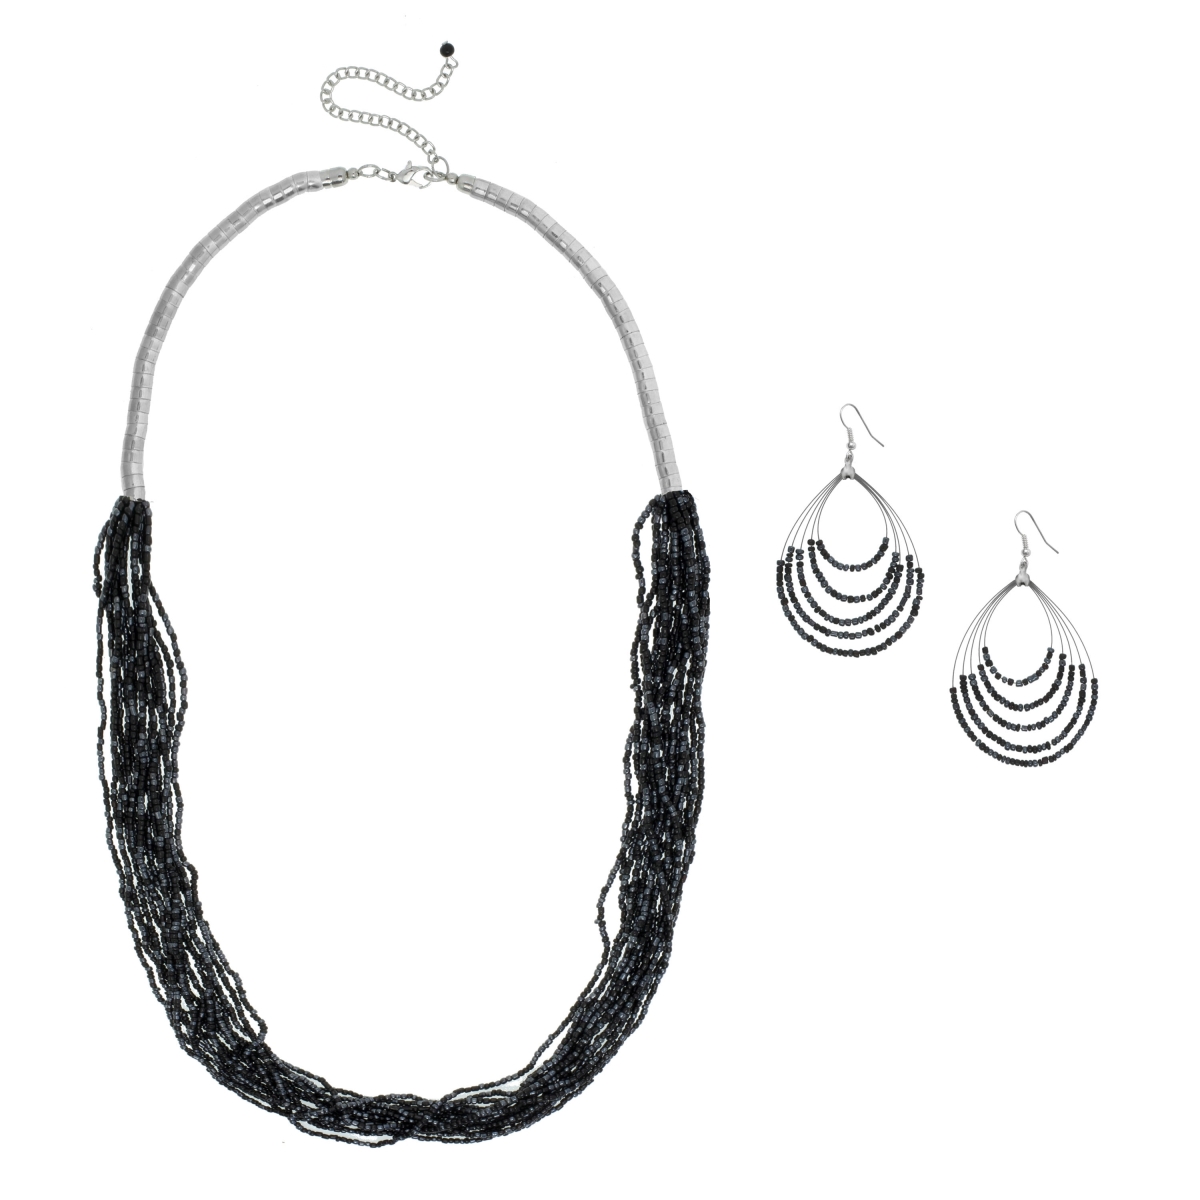 Picture of J&H Designs 4975 Set Antiqued Rhodium-plated Mutli-strand Seed Bead Necklace and Earrings Set - grey